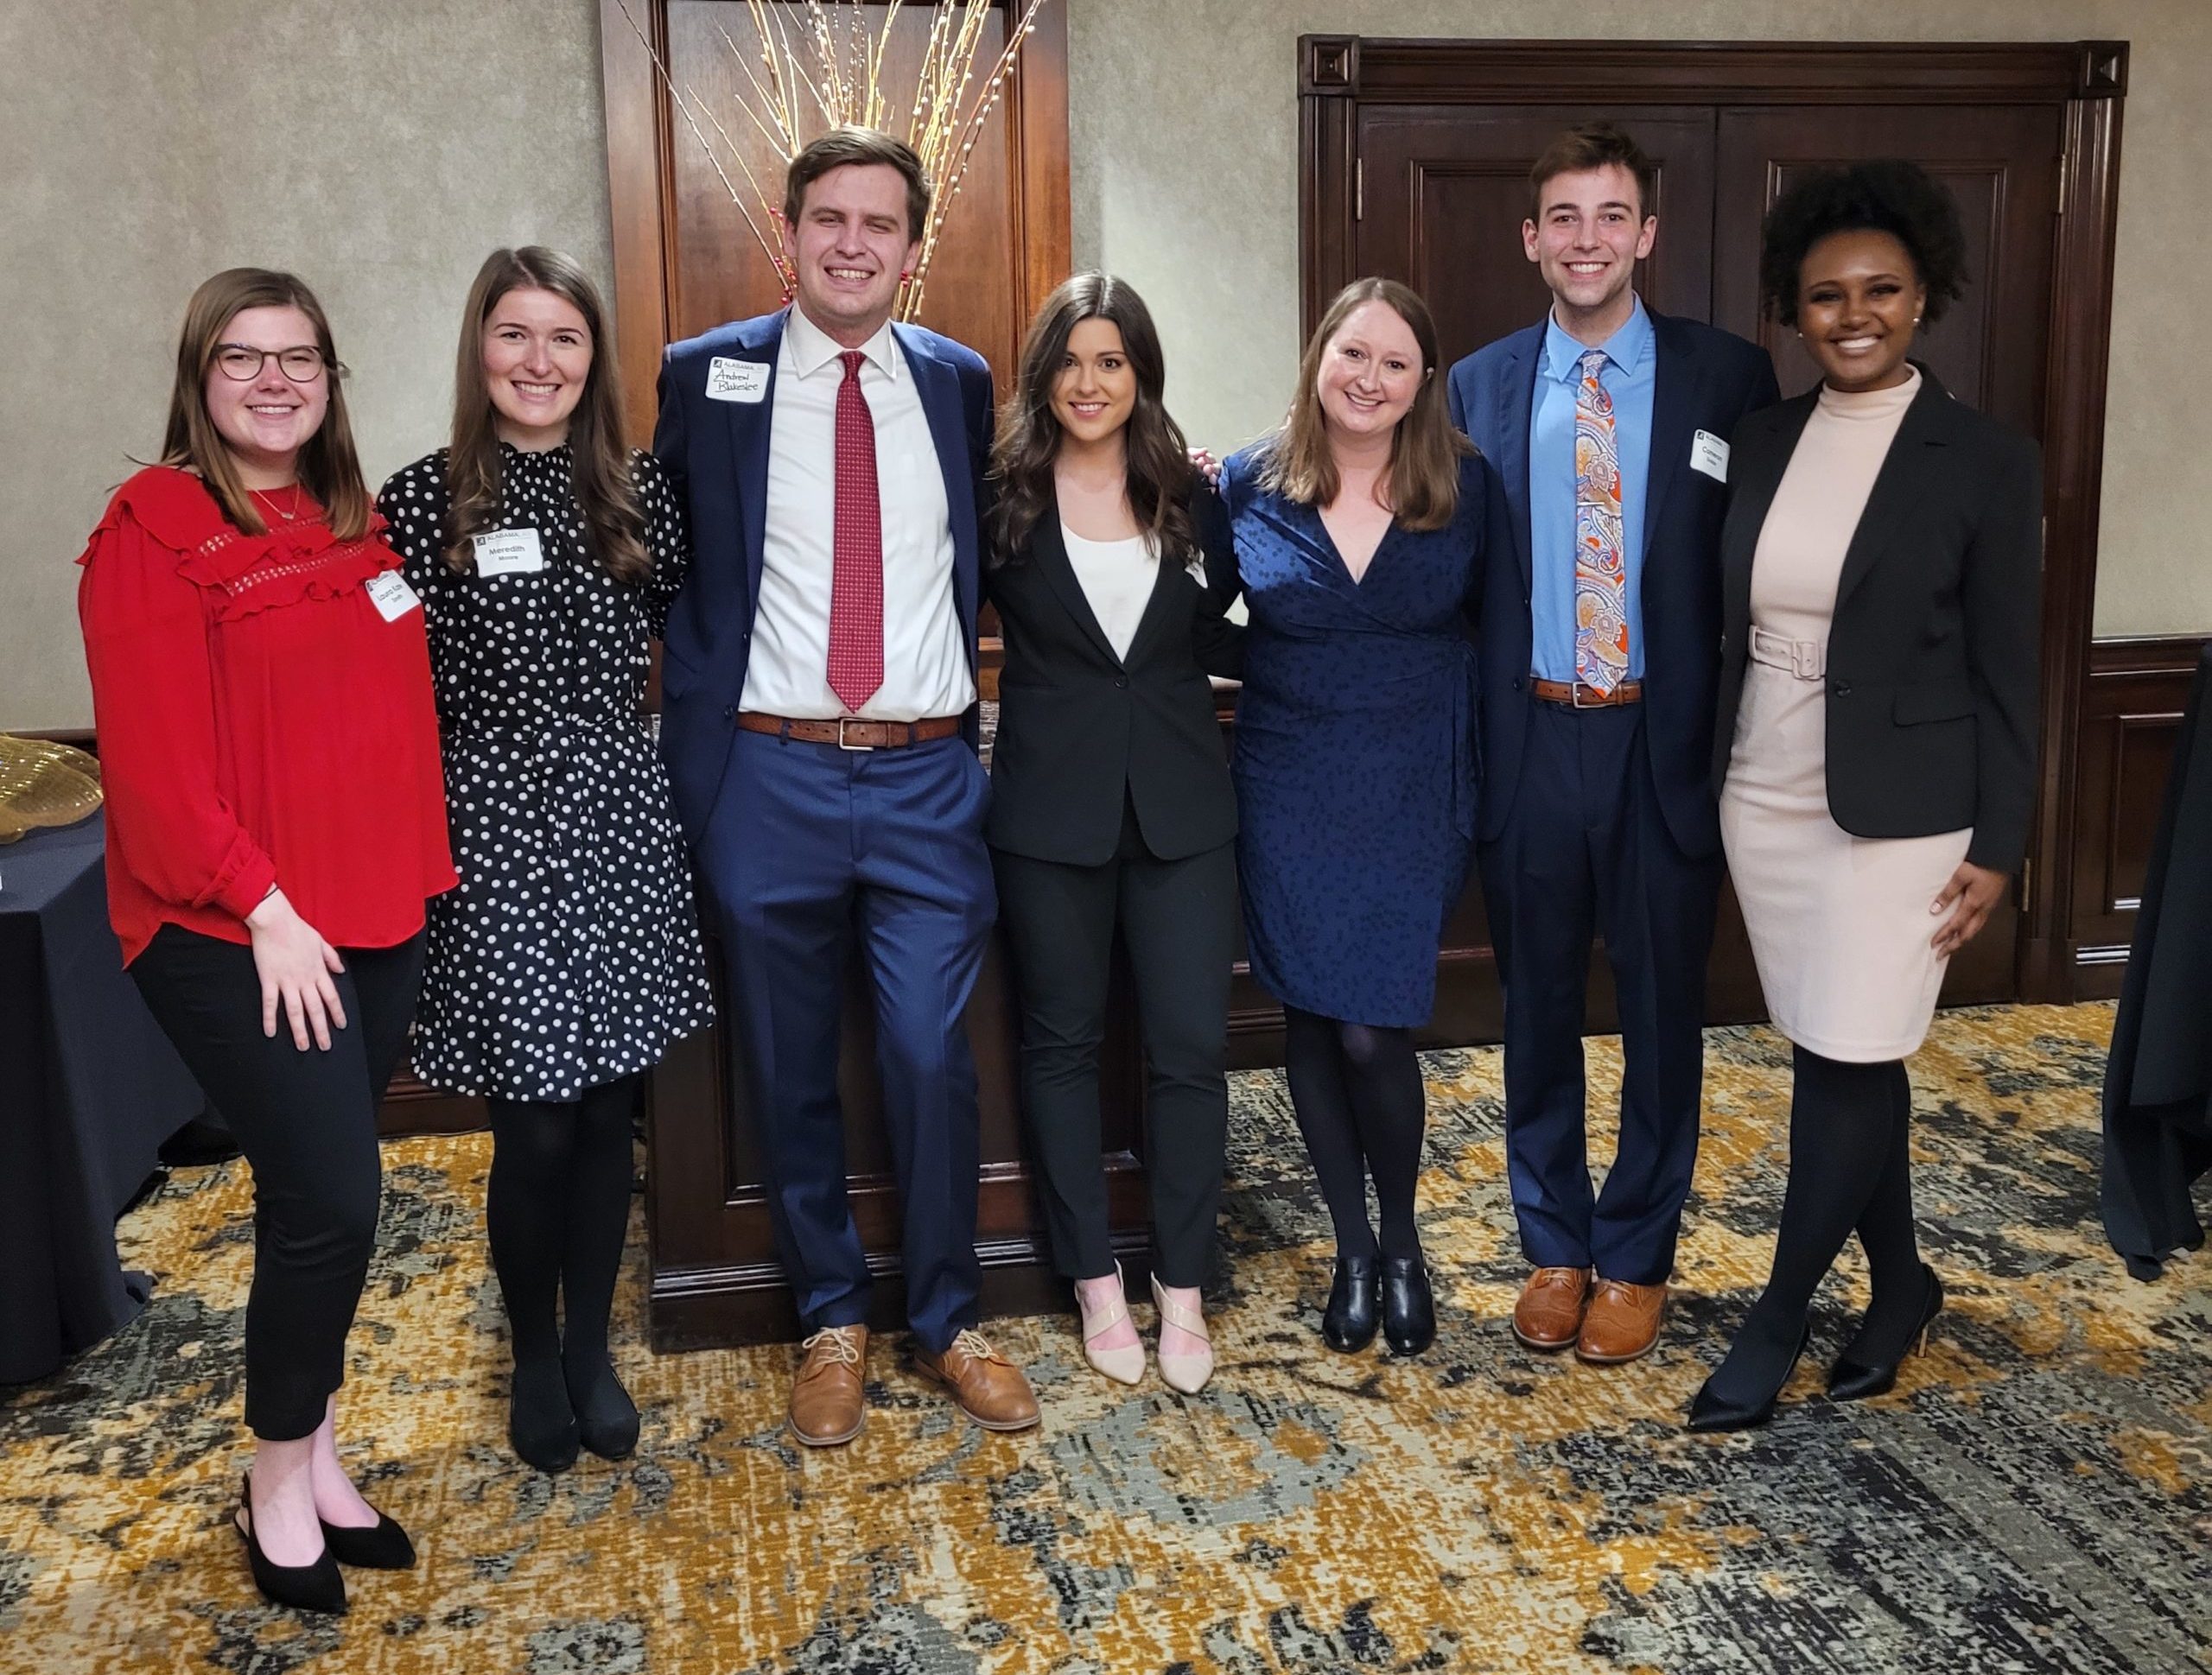 Laura Kate Smith (‘23), Meredith Moore (‘23), Andrew Blakeselee (‘22), Analeigh Barnes (‘22), Megan Walsh (‘12) Director of DC Externships, Cameron Dobbs (‘23), and Amani Moore (‘23) pose for a photo at the Dean’s Reception at the City Club on March 1, 2022